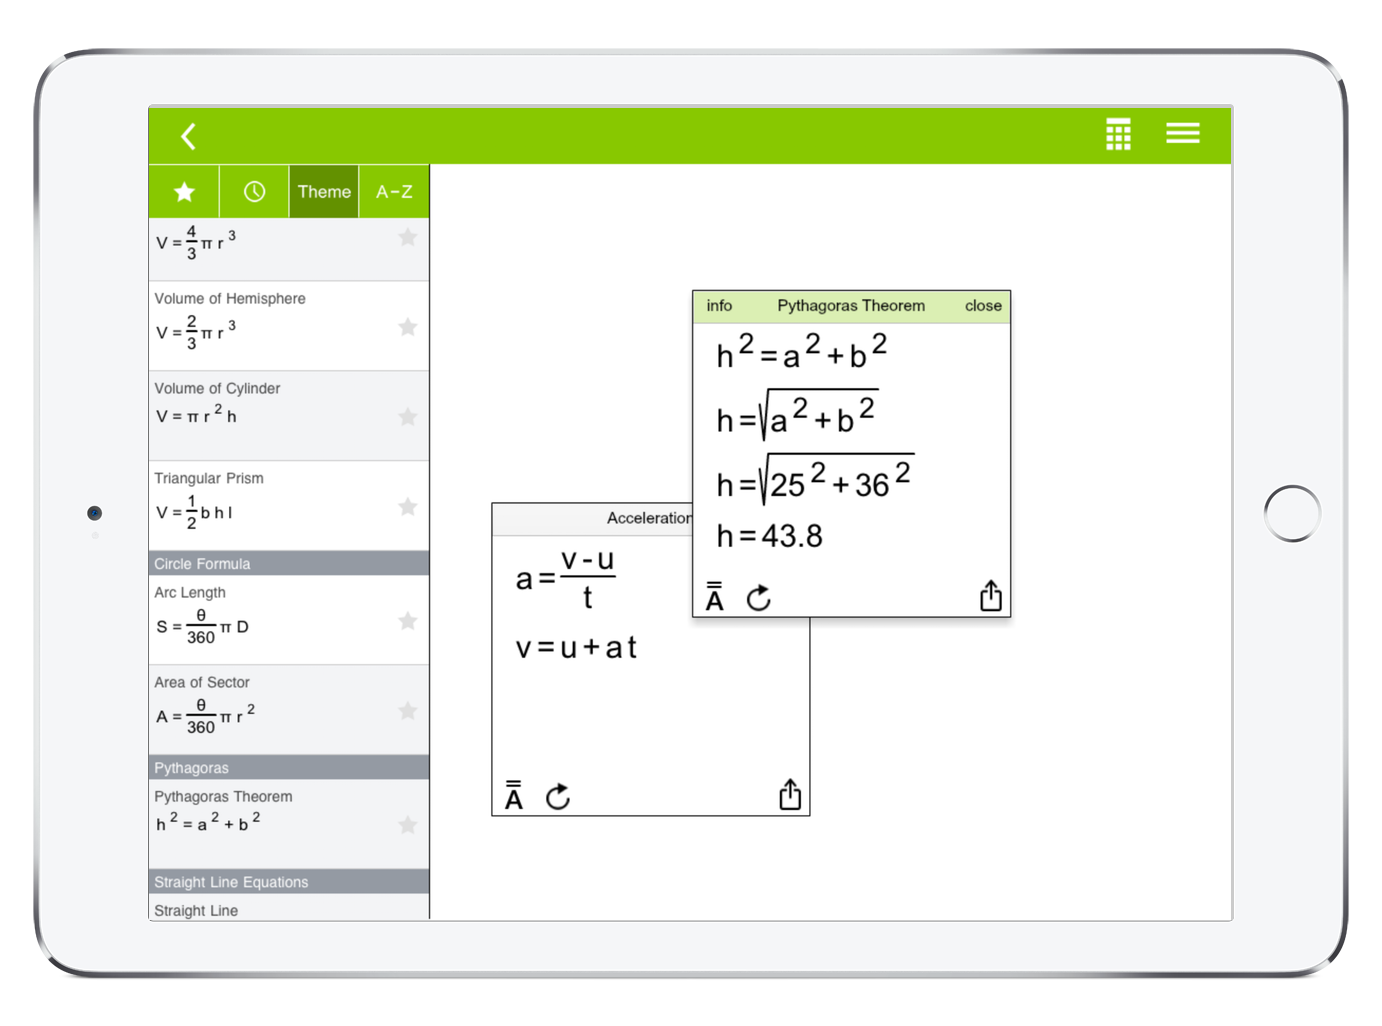 How to use EquationLab in maths and physics for fast and accurate calculations